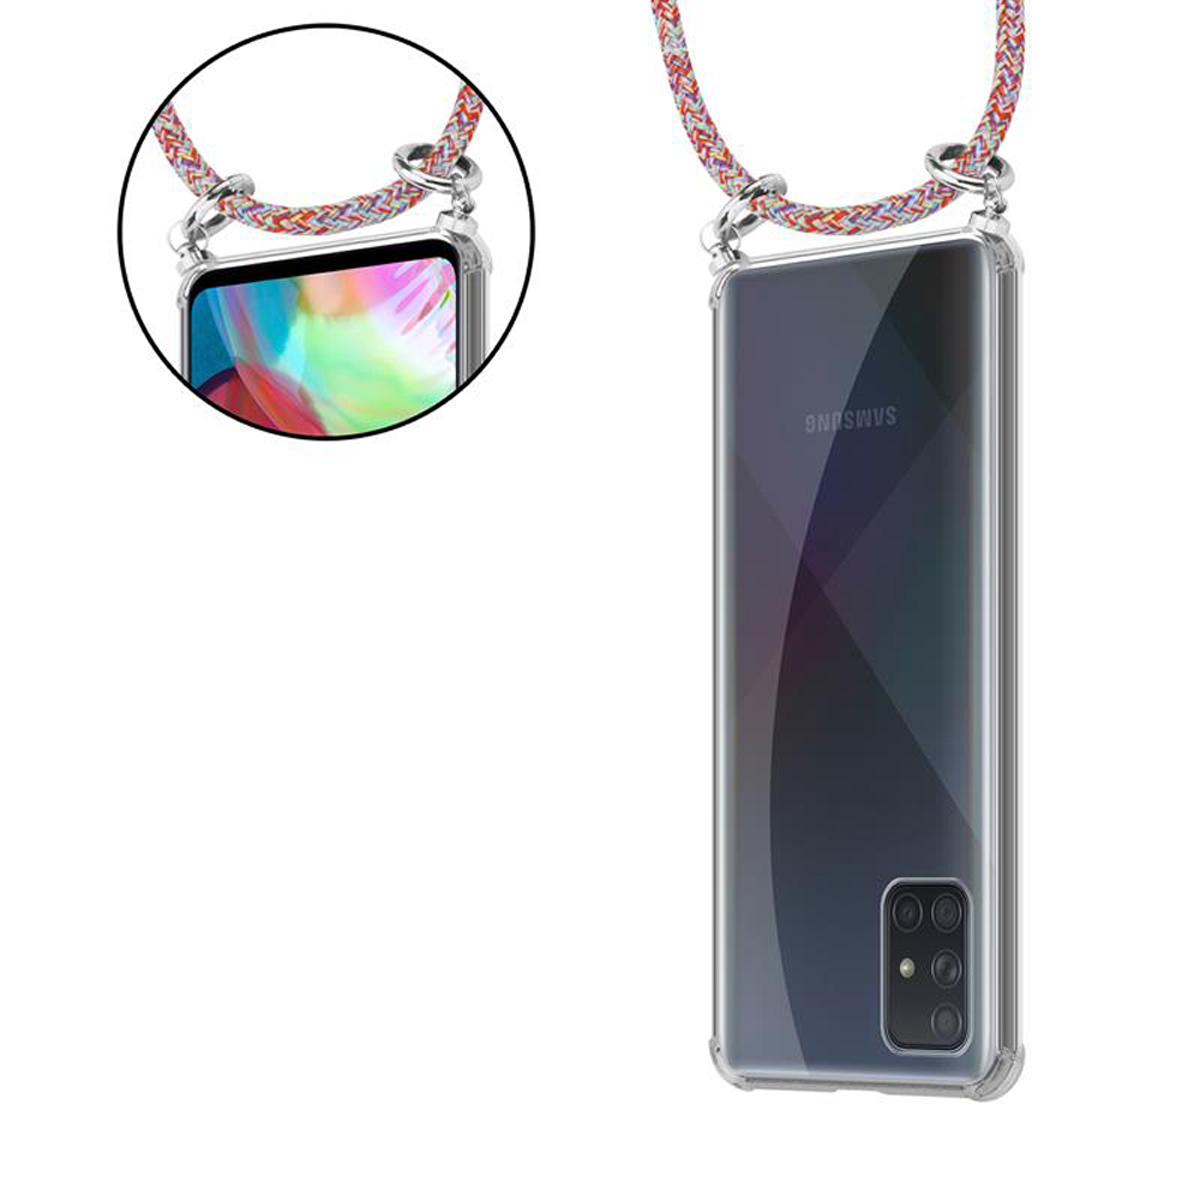 mit Band 5G, Kordel PARROT COLORFUL Ringen, Handy und abnehmbarer Kette Backcover, Hülle, CADORABO Galaxy A51 Silber Samsung,